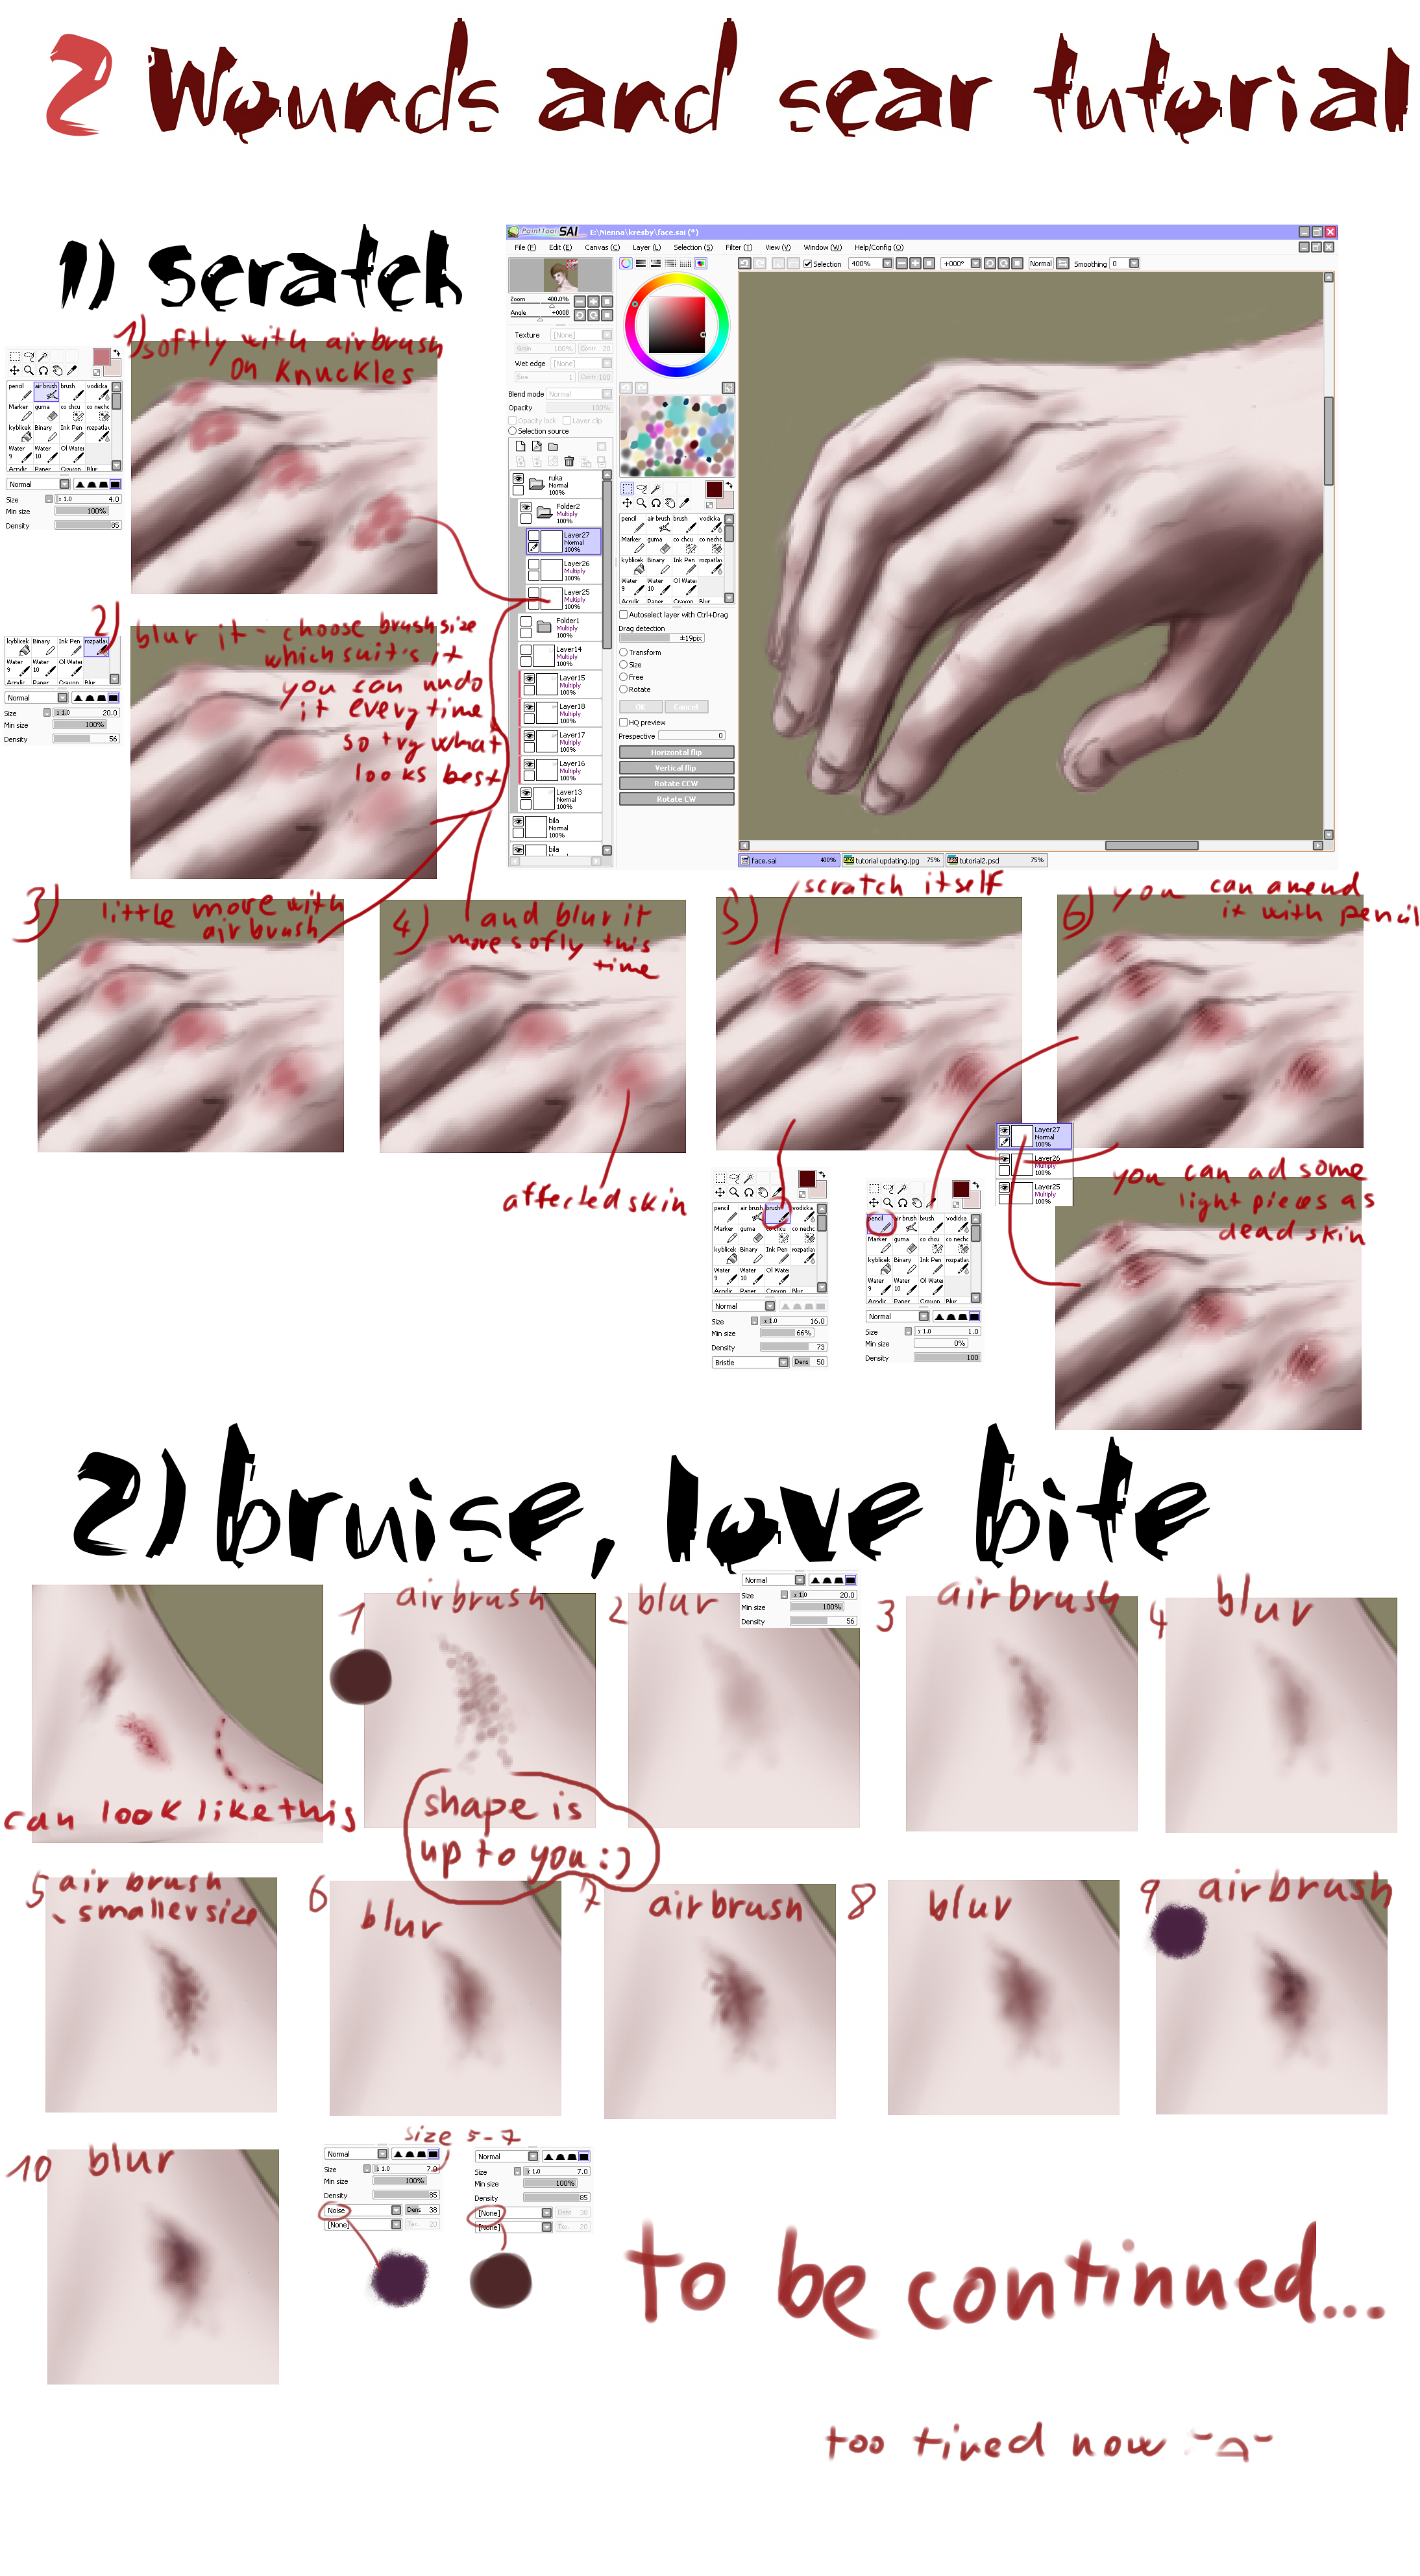 Wounds and scars tutorial 2 by Janiko-neko-chan on DeviantArt